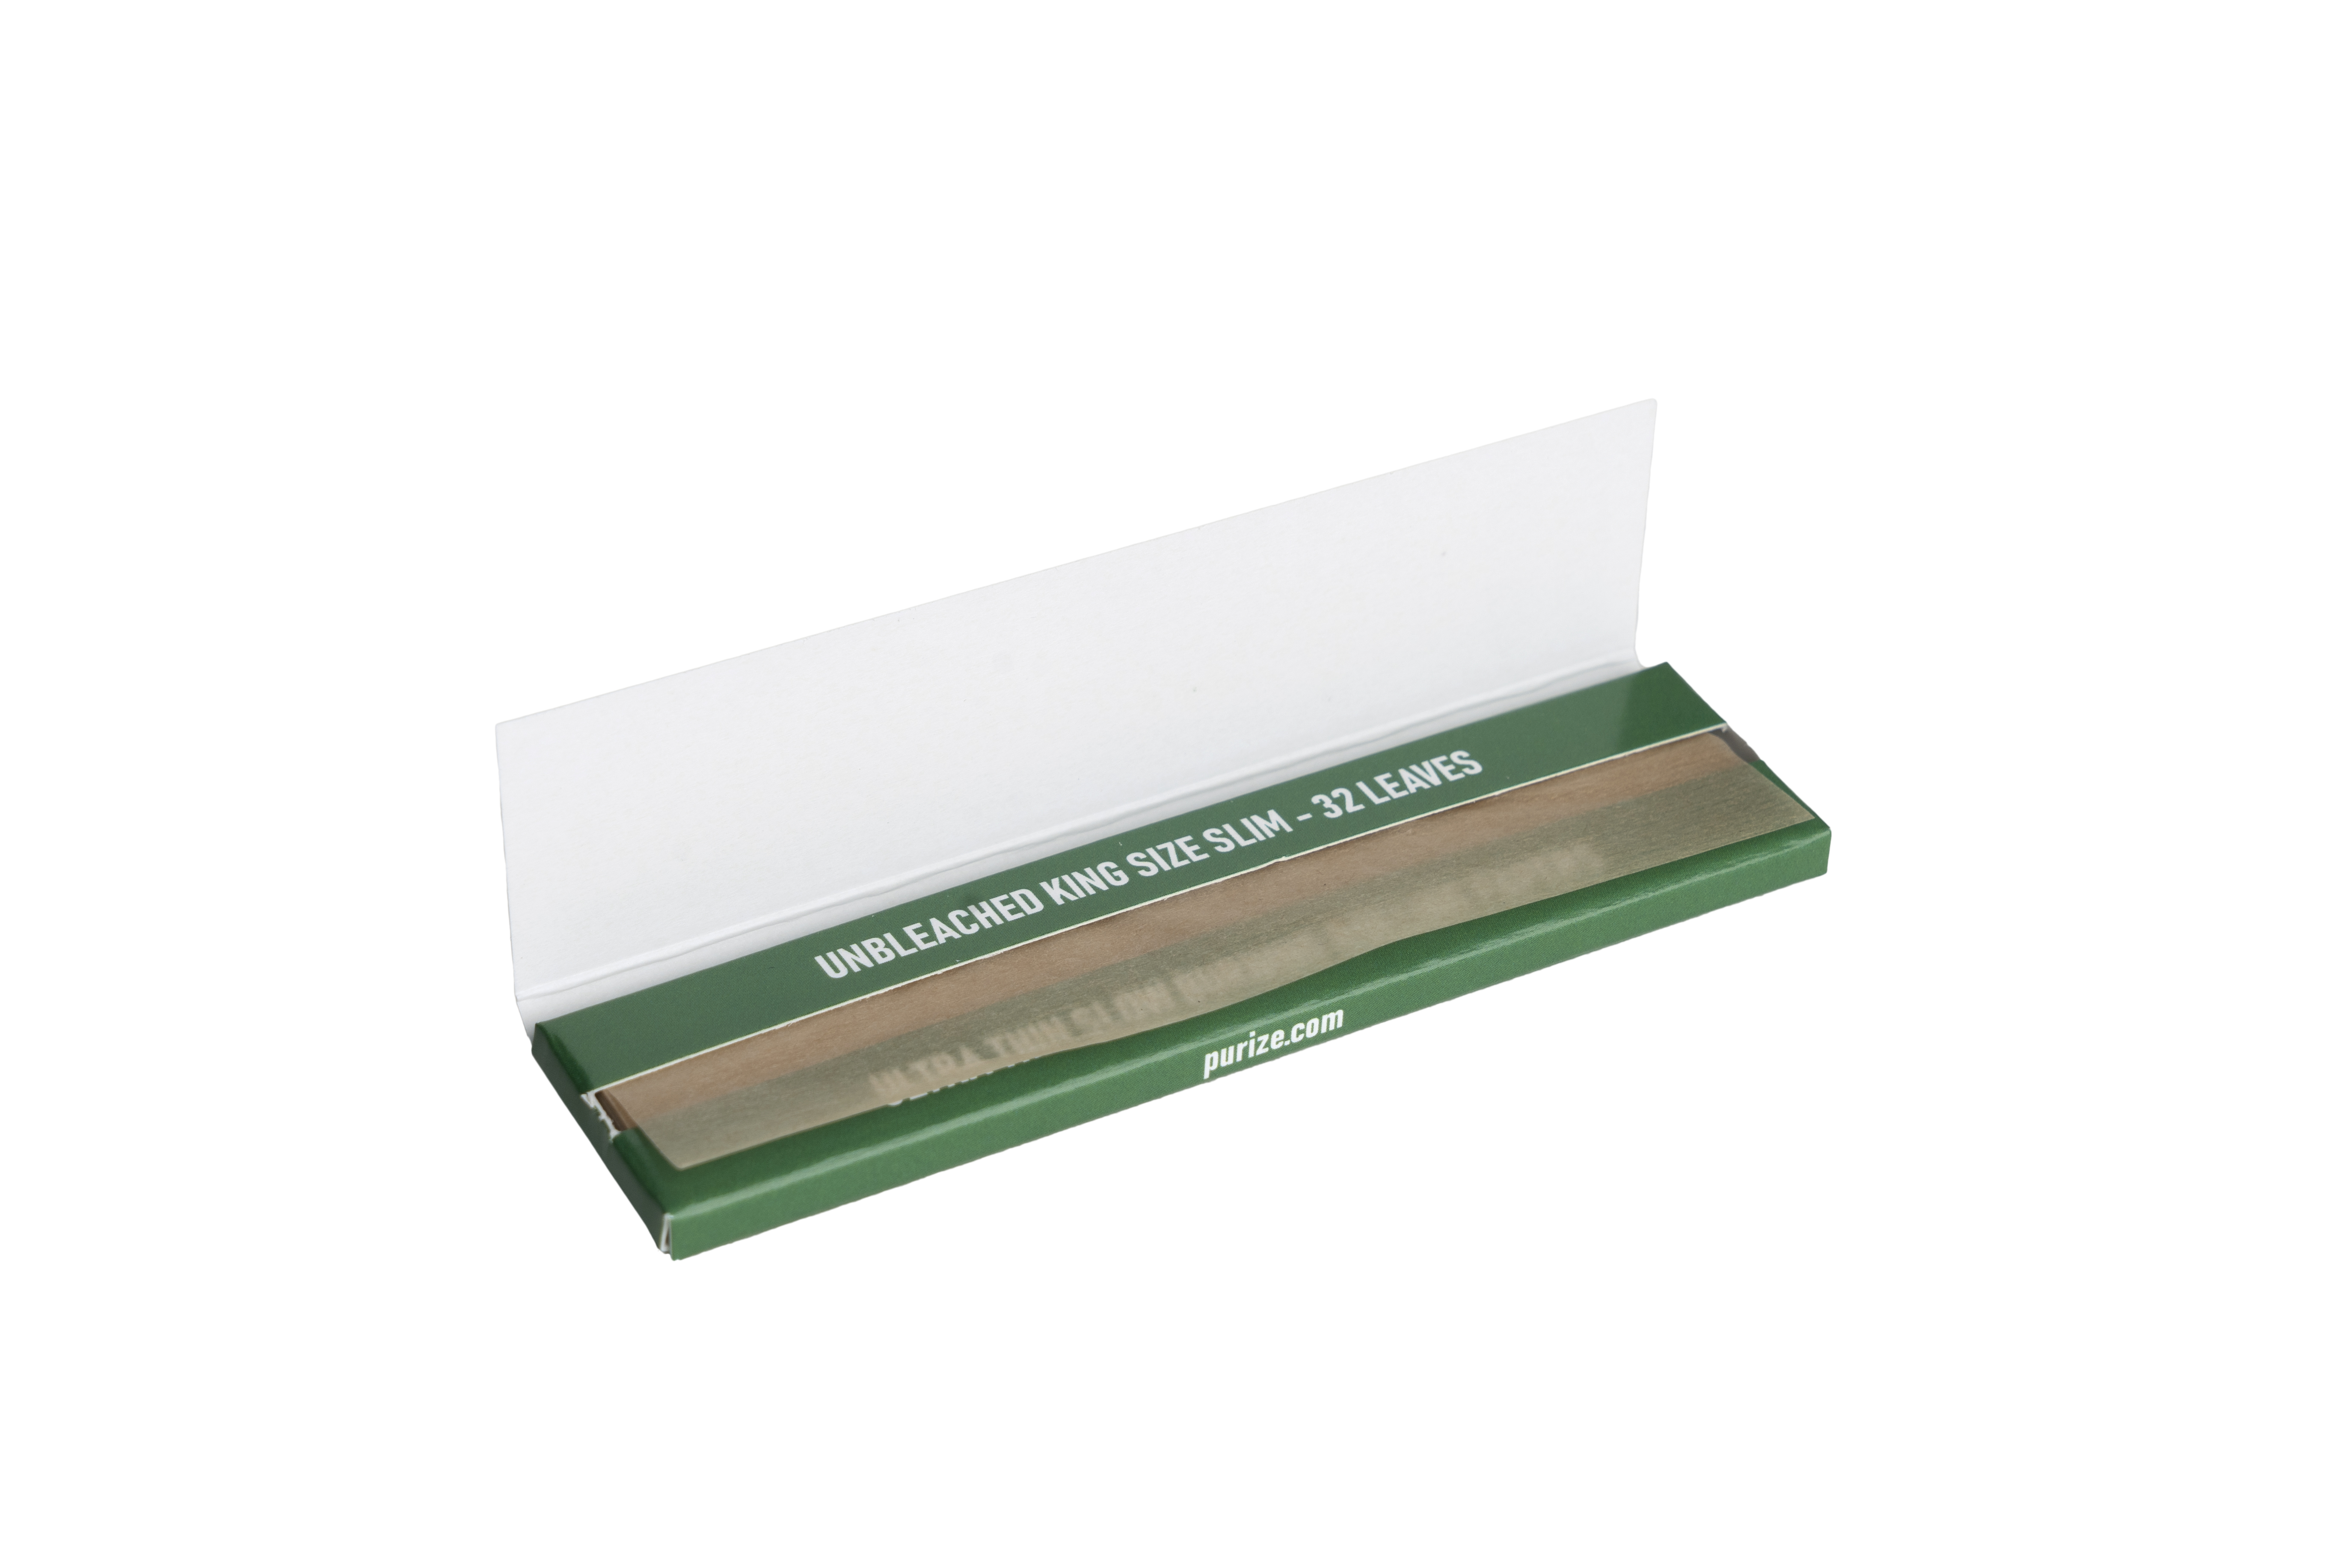 PURIZE® x Richter Müller King Size Slim Papers